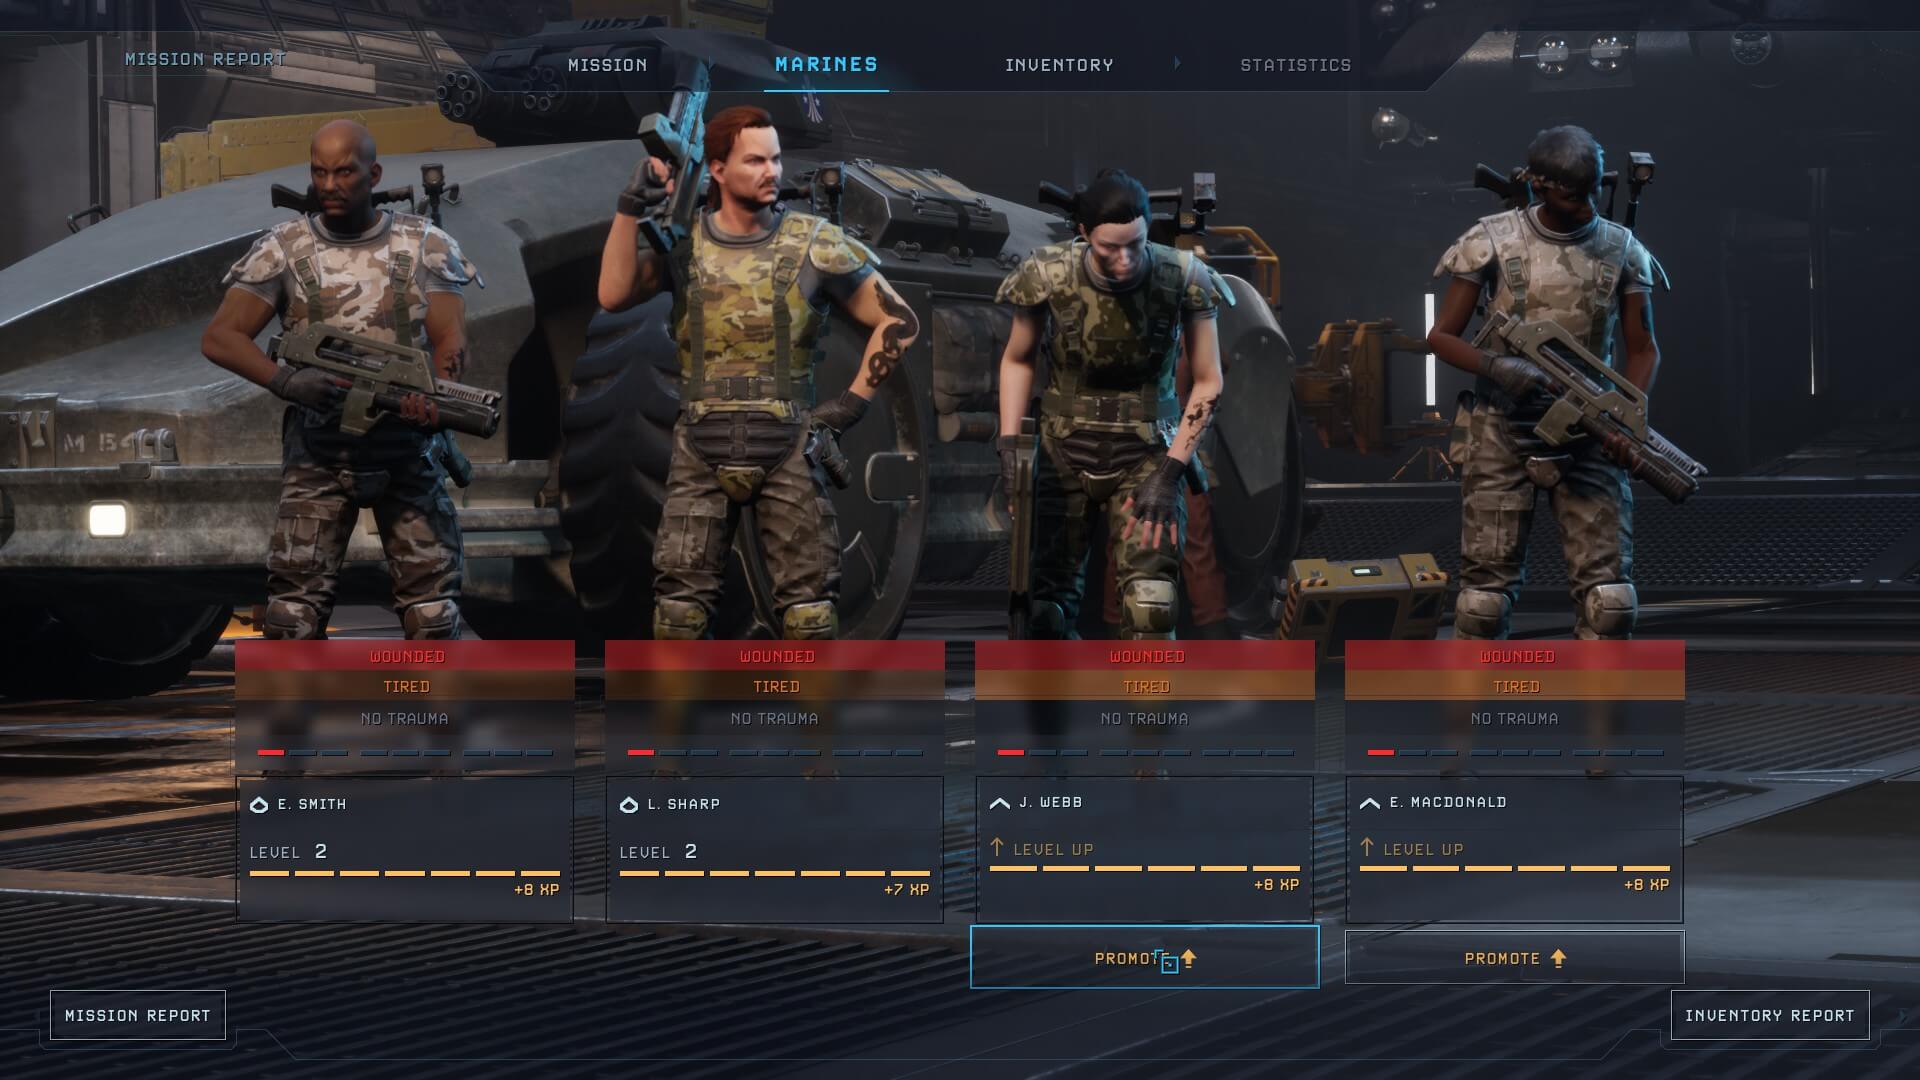 The line up of my squad after returning from a mission. There are several bars that show they are both stressed and exhausted. two members can be promoted.